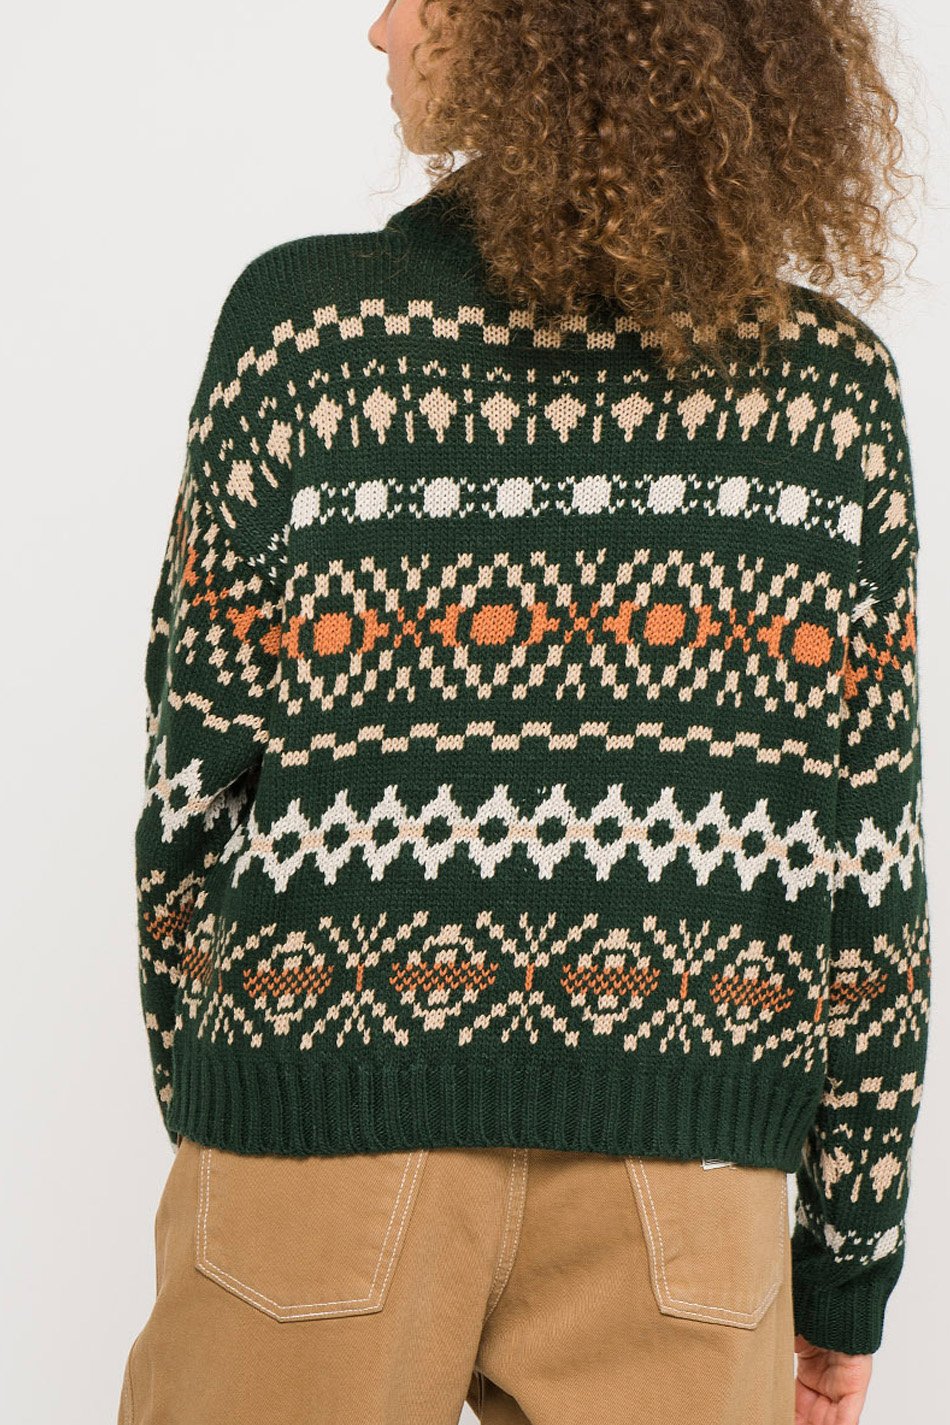 Jacquard Green Knitted Sweater